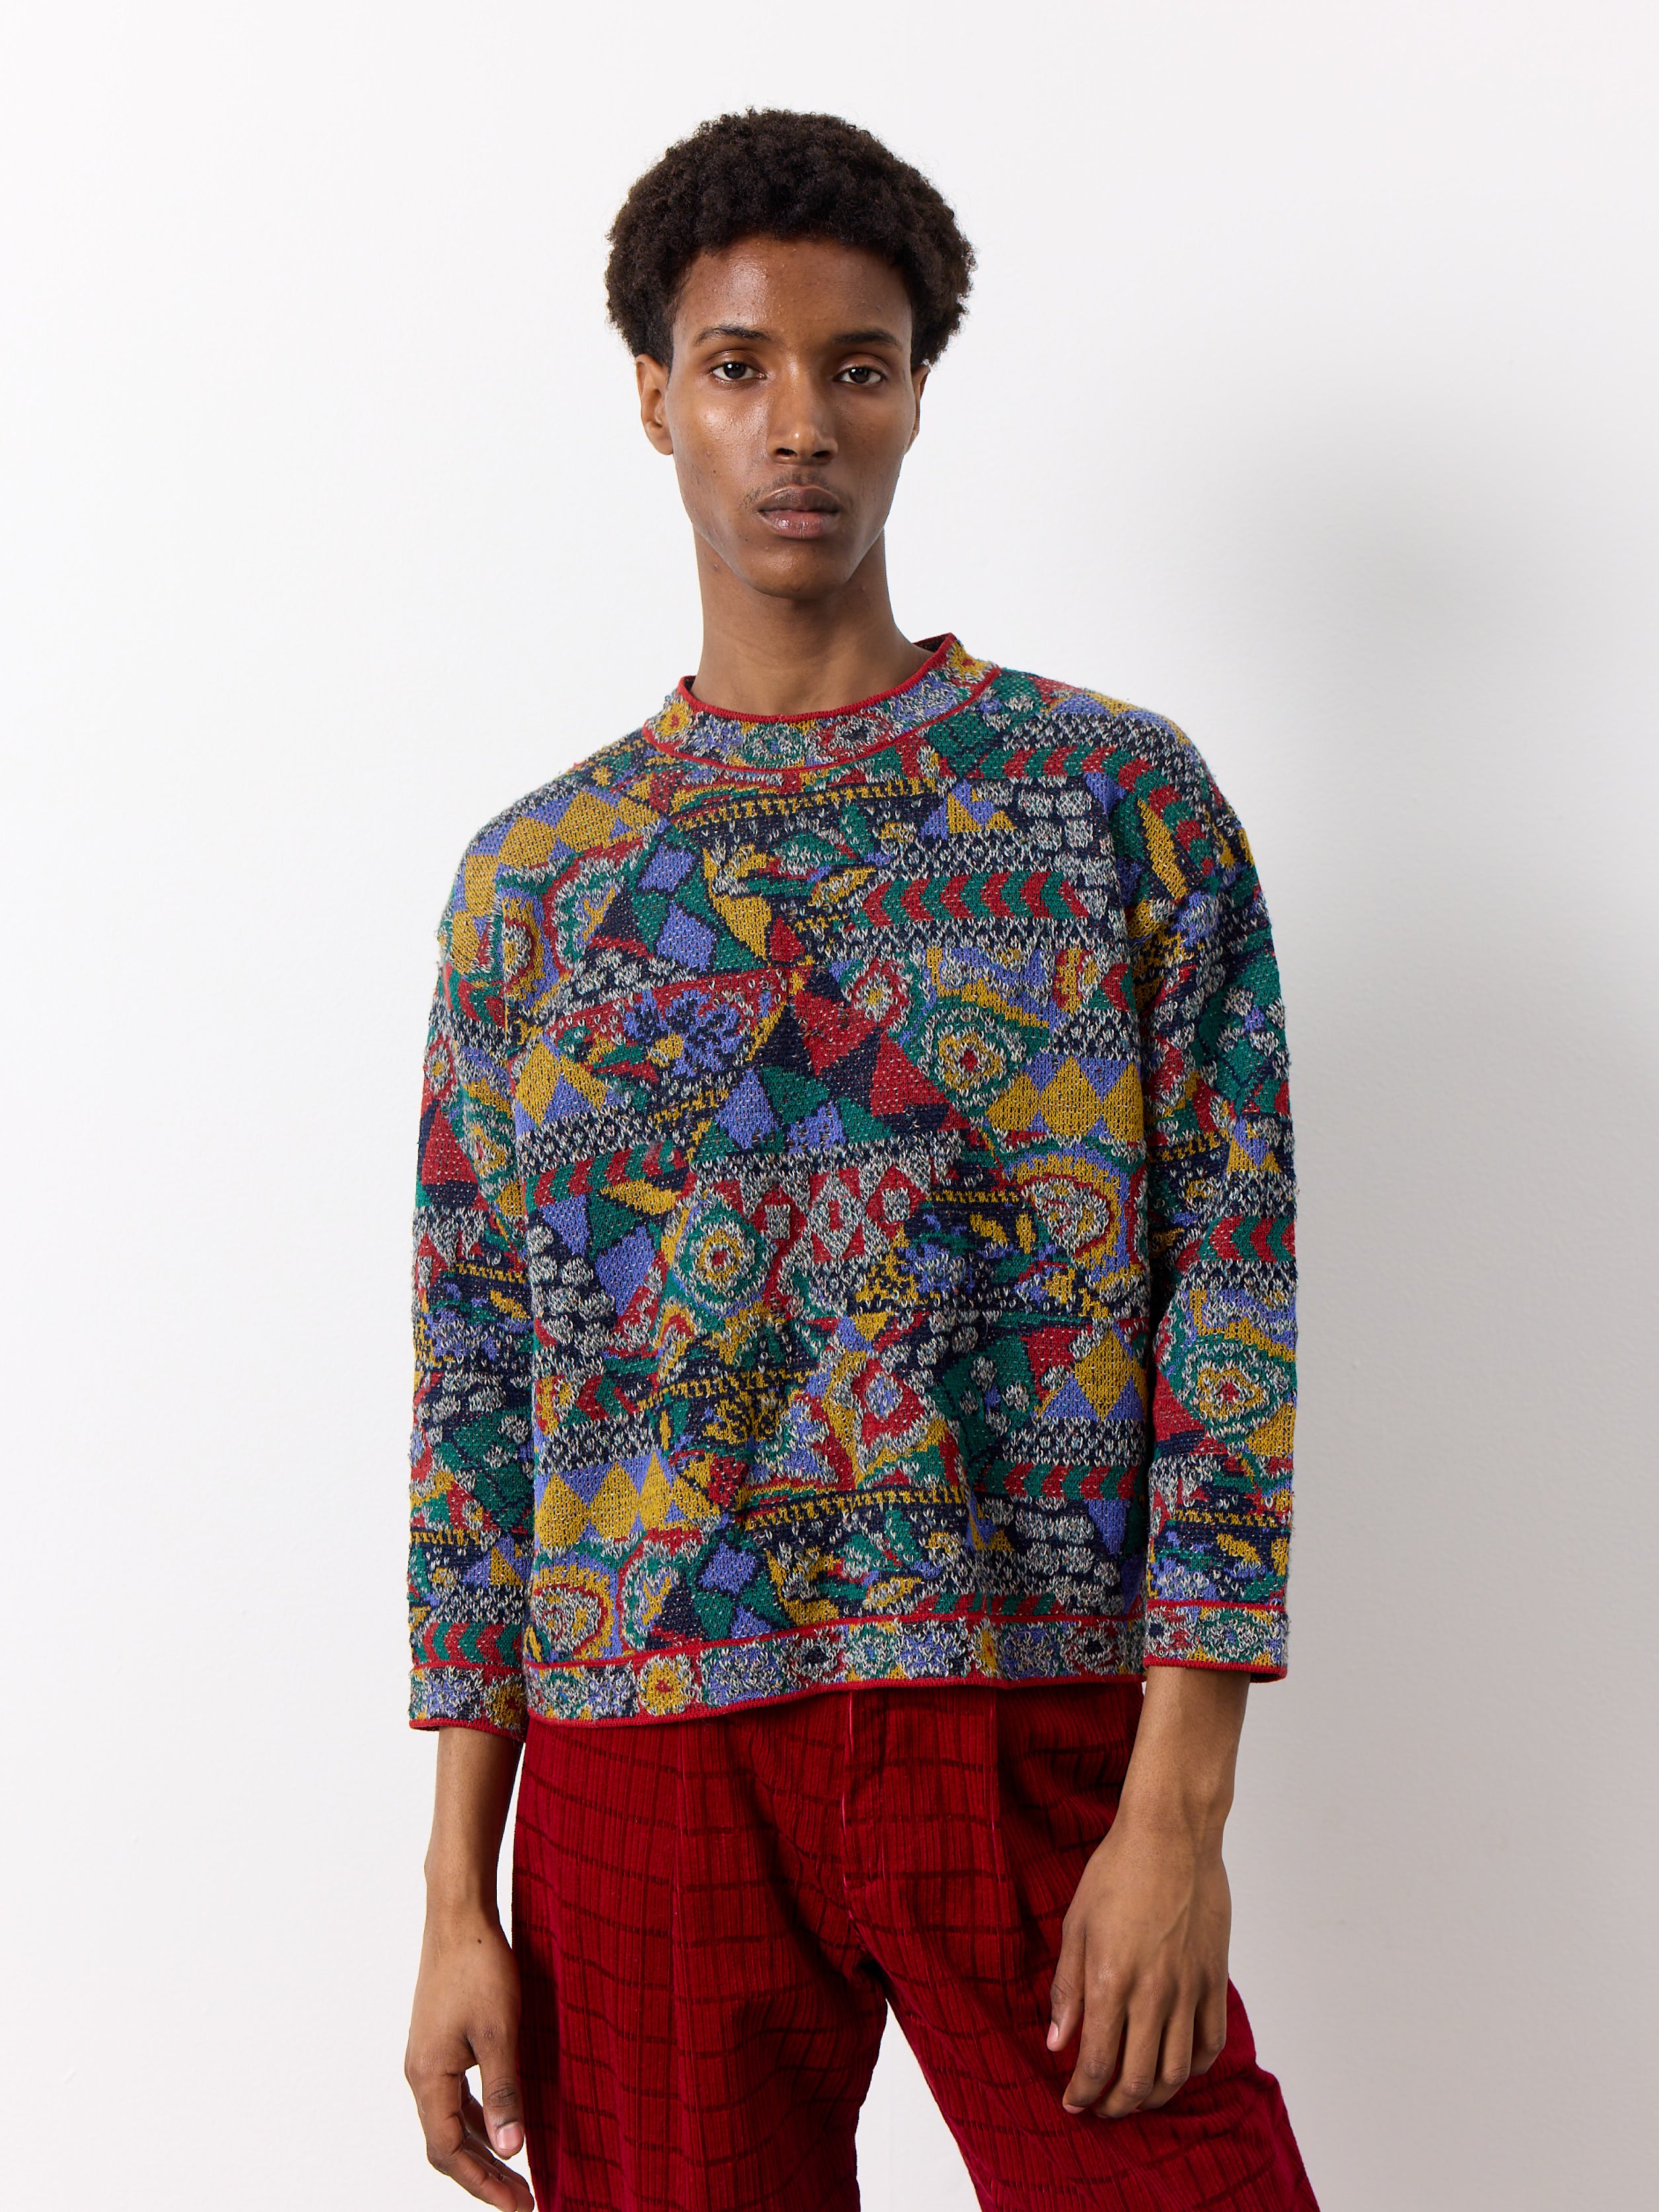 This carefully crafted Missoni knit print sweater features a timeless and striking design. With a round neck and soft knit construction, it effortlessly flatters the silhouette and runs slightly small.